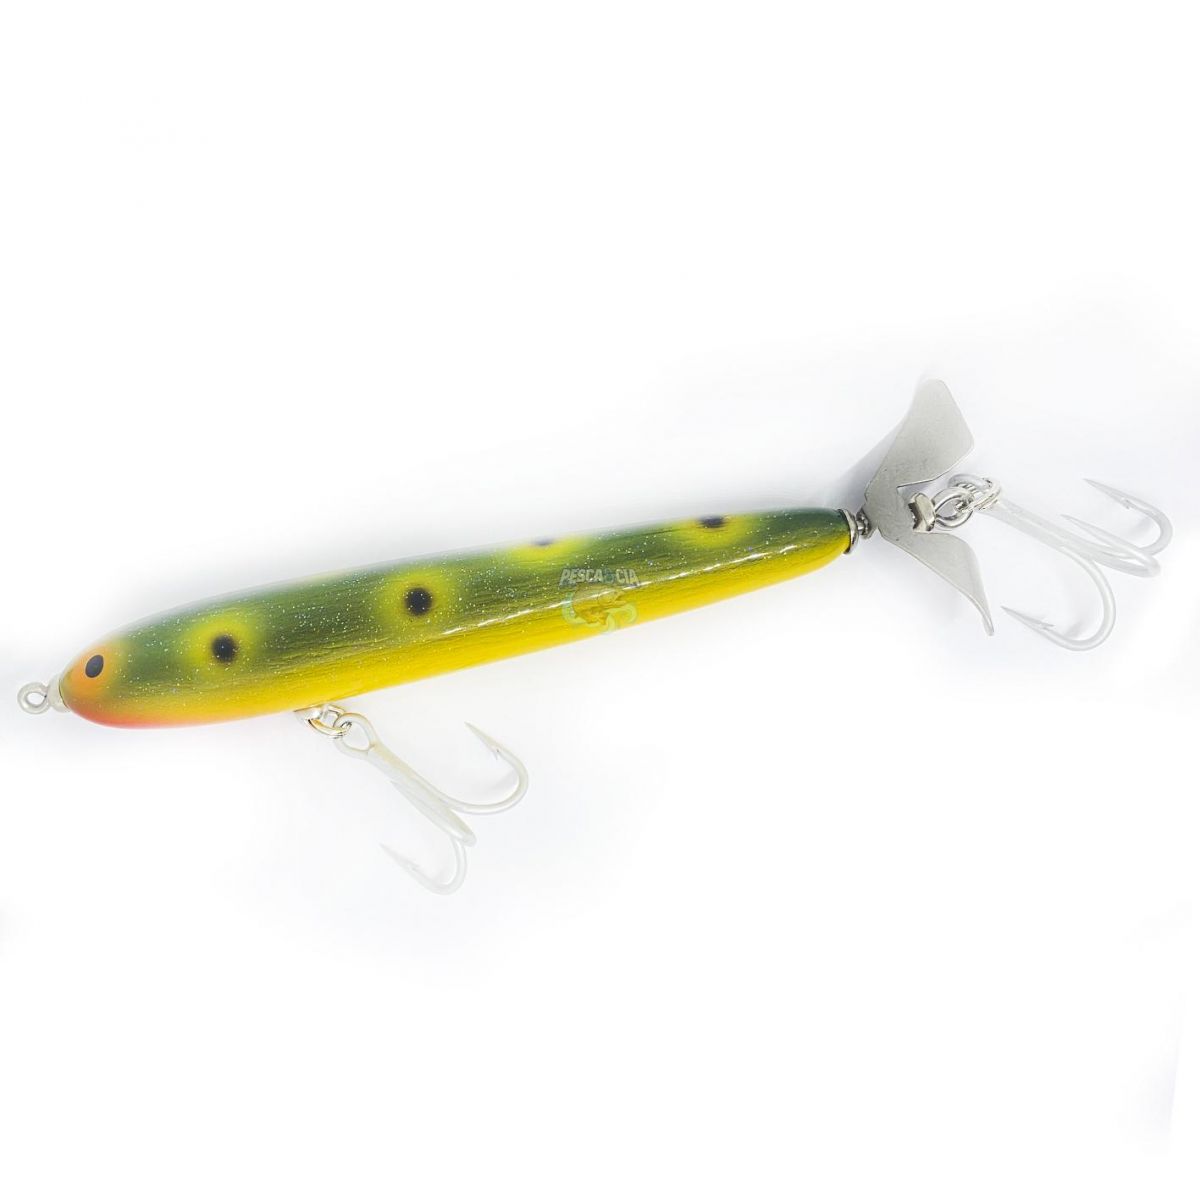 About – Highroller Lures